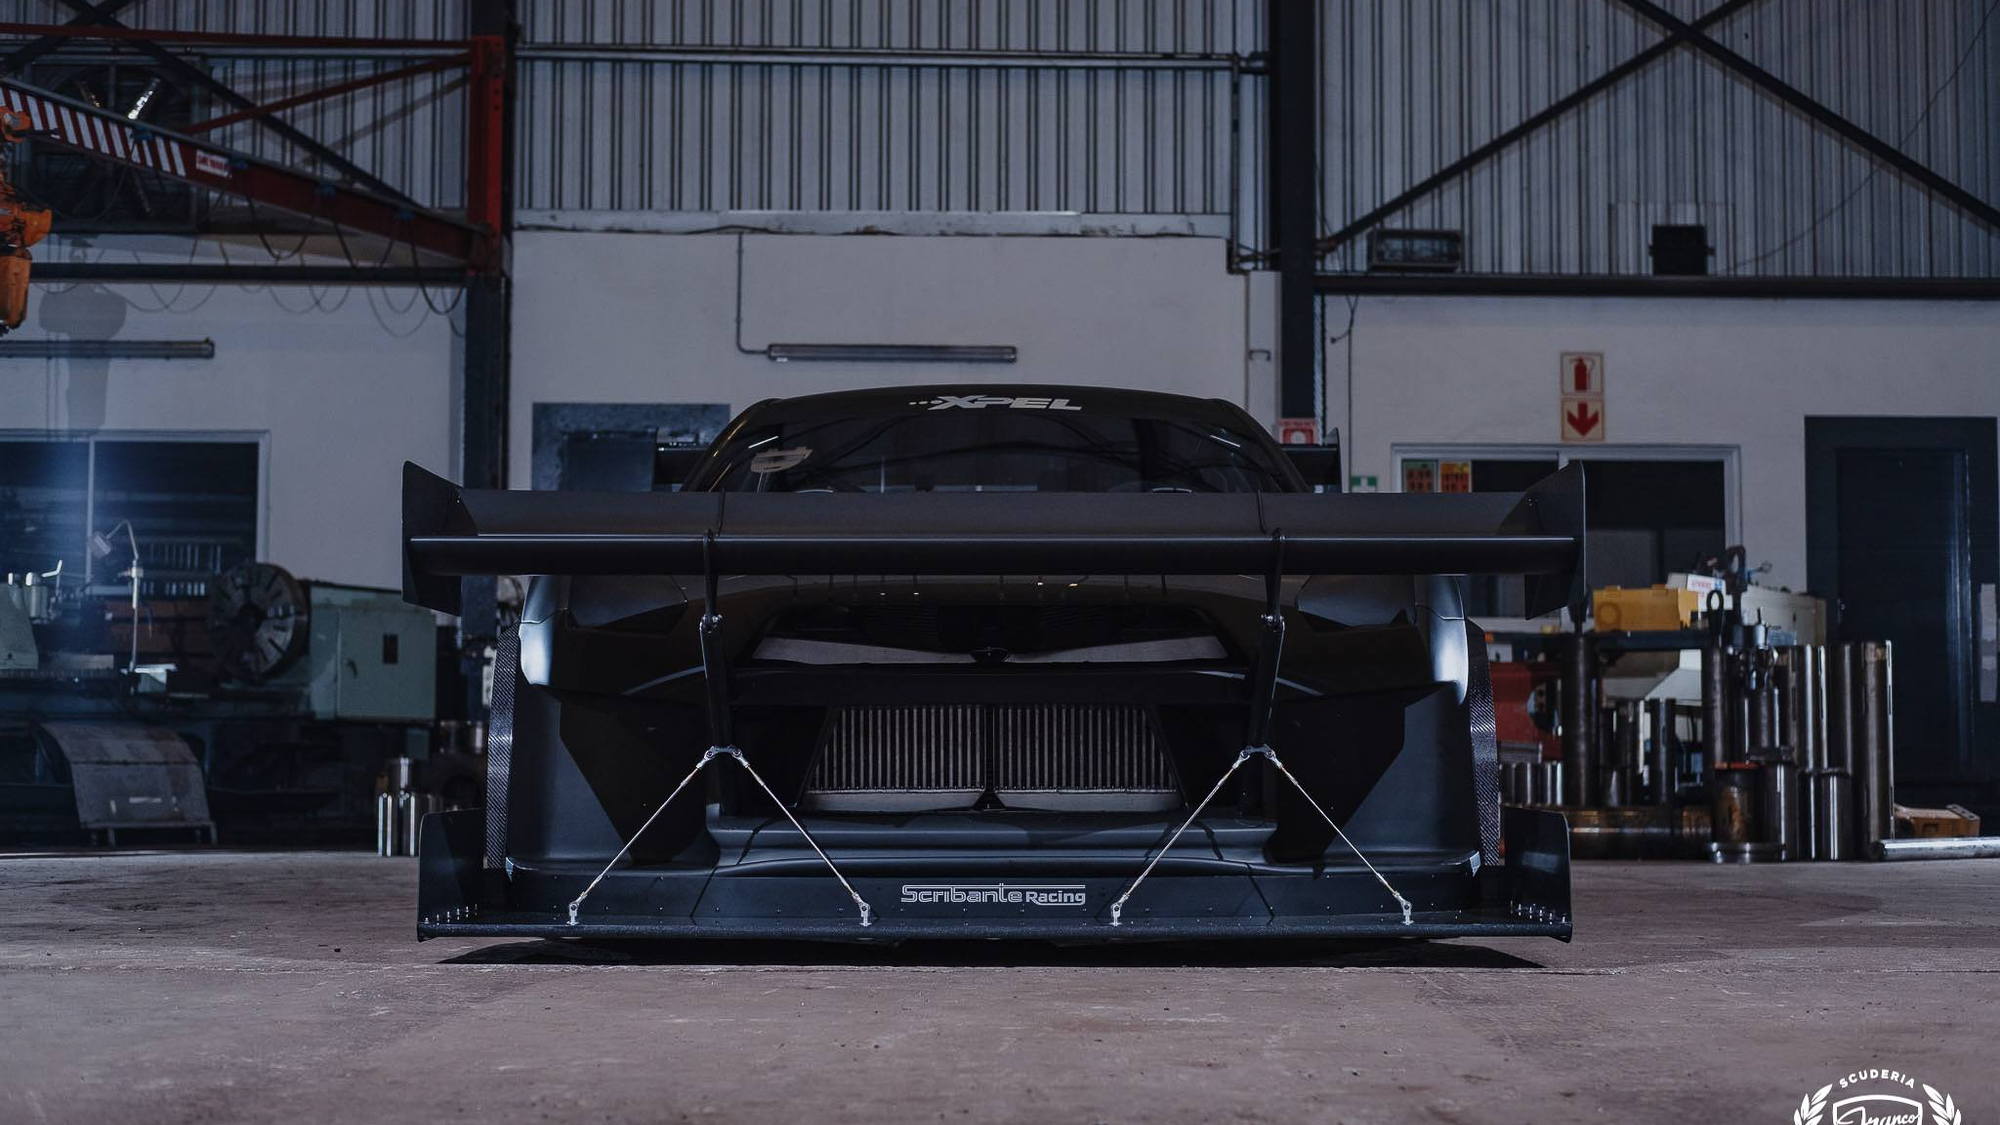 Nissan GT-R Hill Climber Has Plenty Of Wing, 1,600 HP At The Wheels